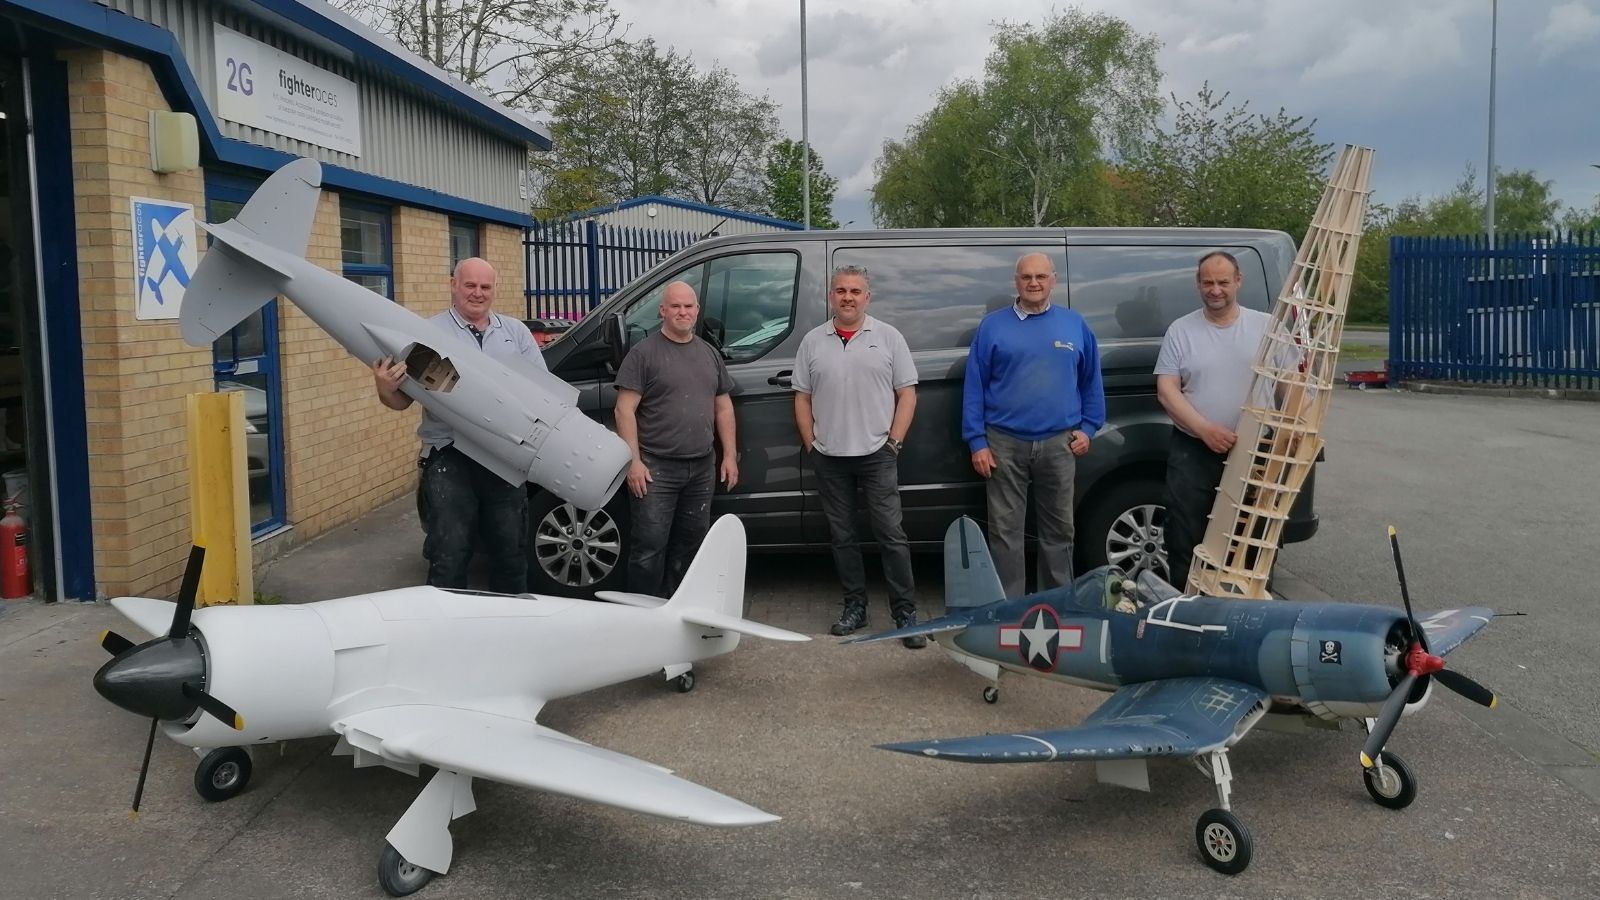 Model aeroplane builder company see sales fly high